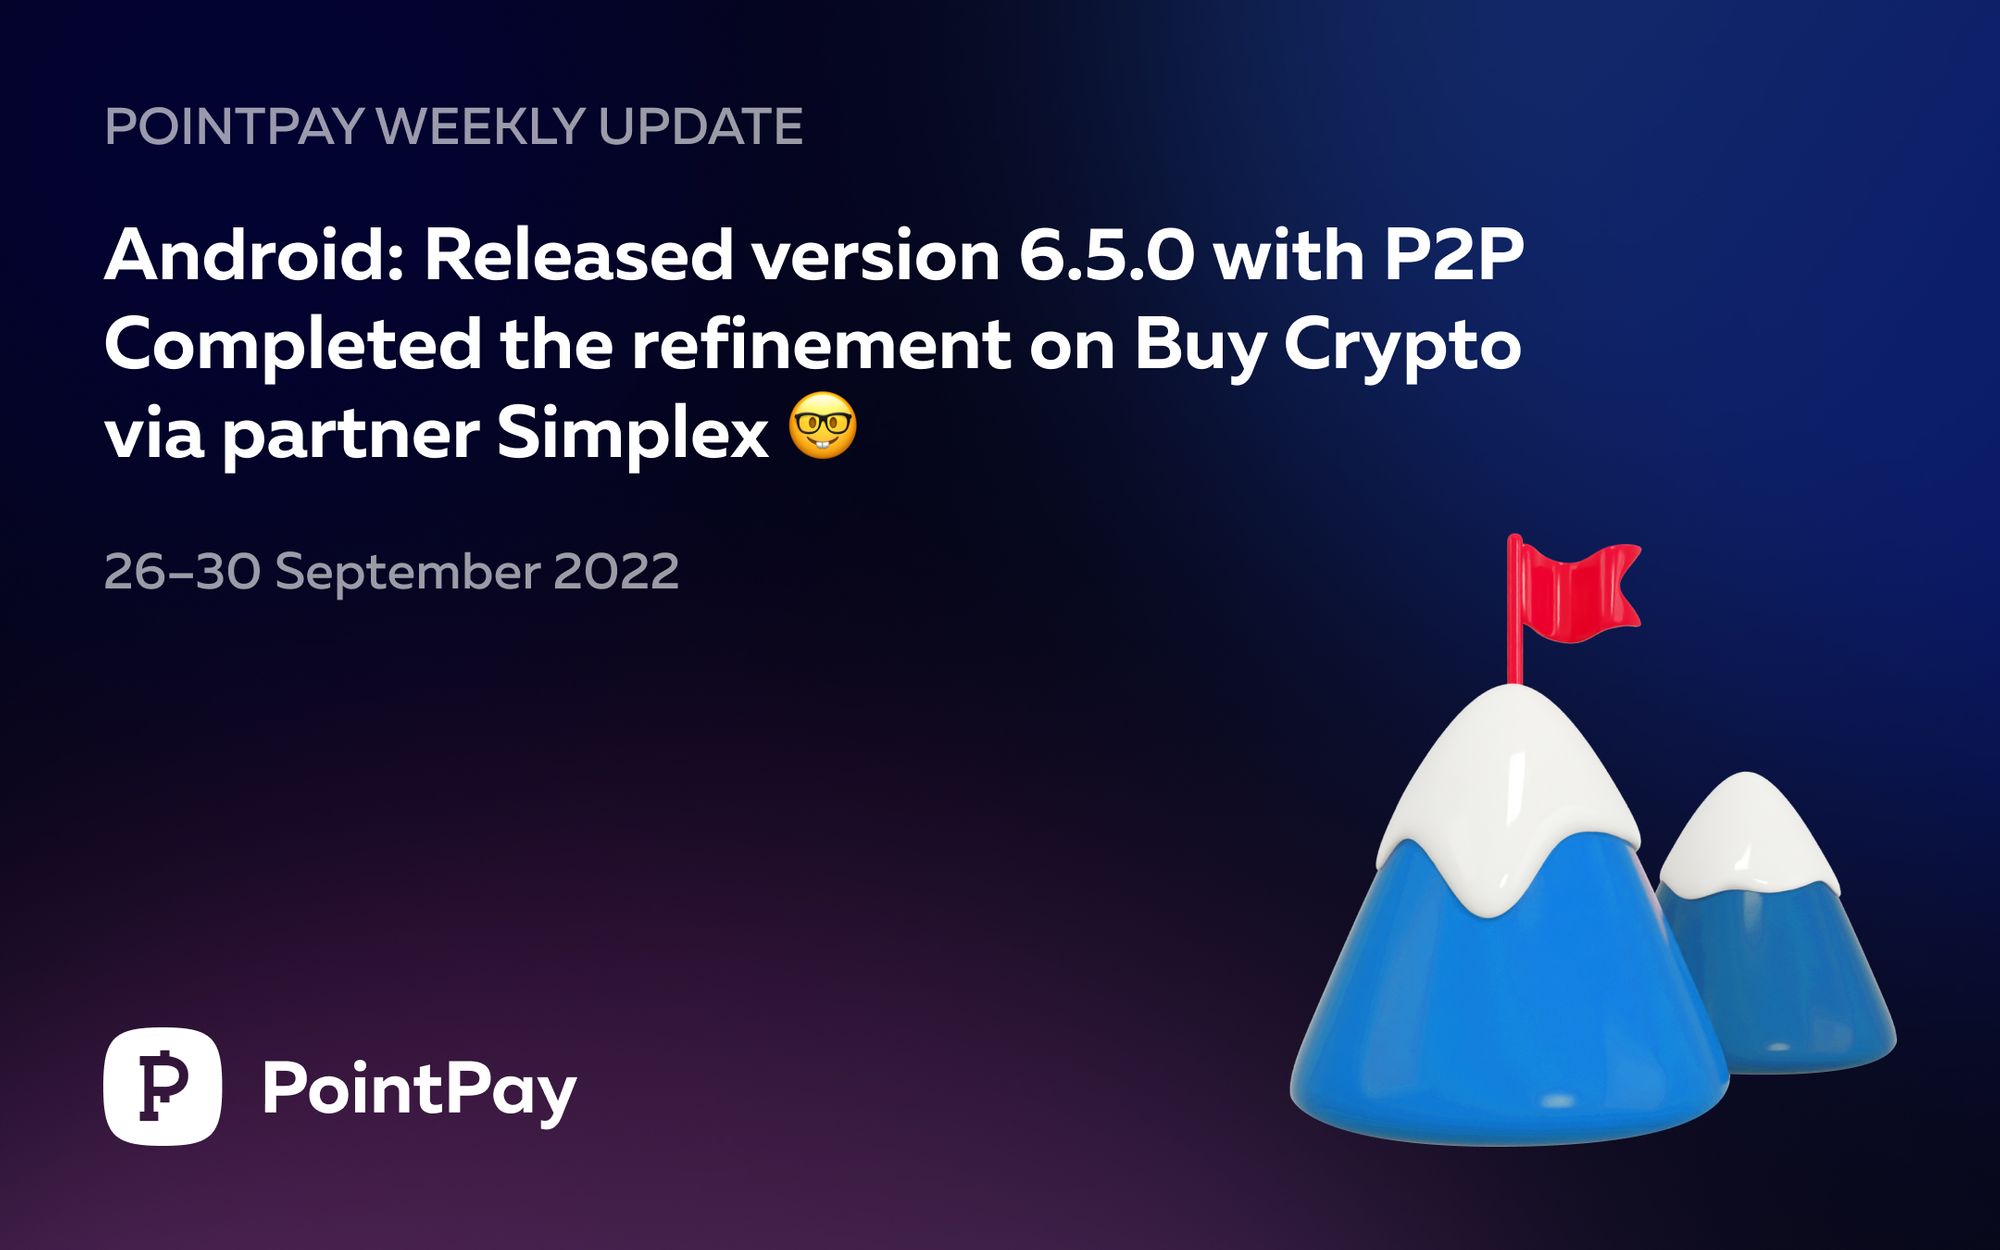 PointPay Weekly Update (26 - 30 September 2022)